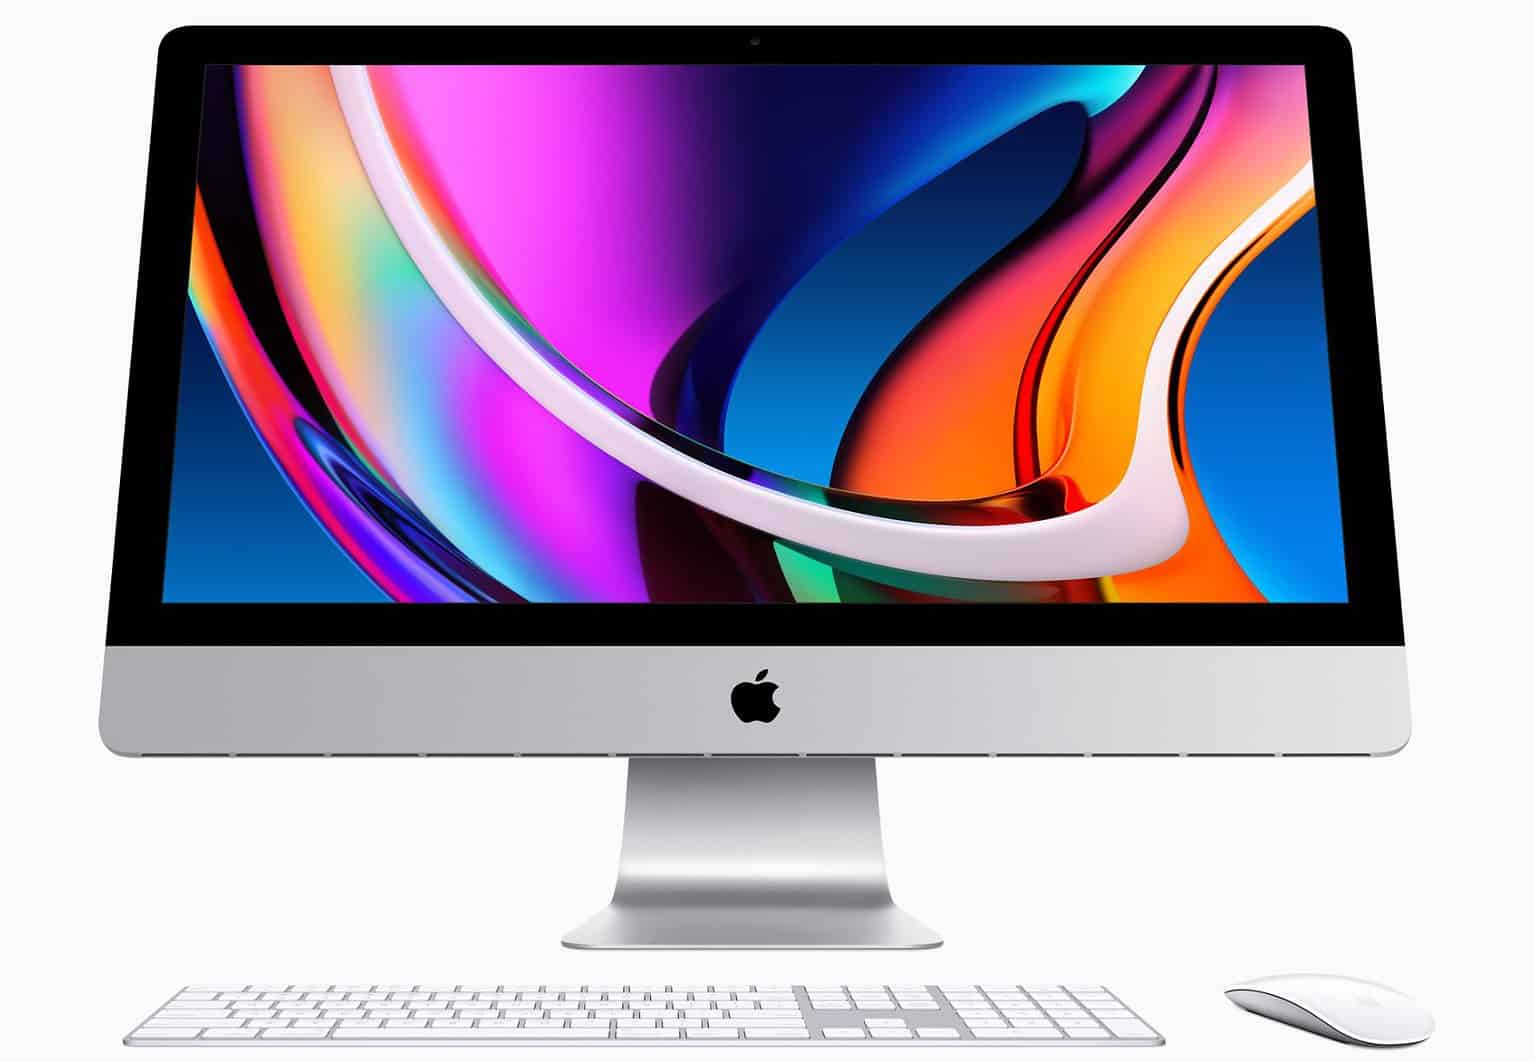 Apple releases new 27inch iMac with 10th gen Intel processors, Retina